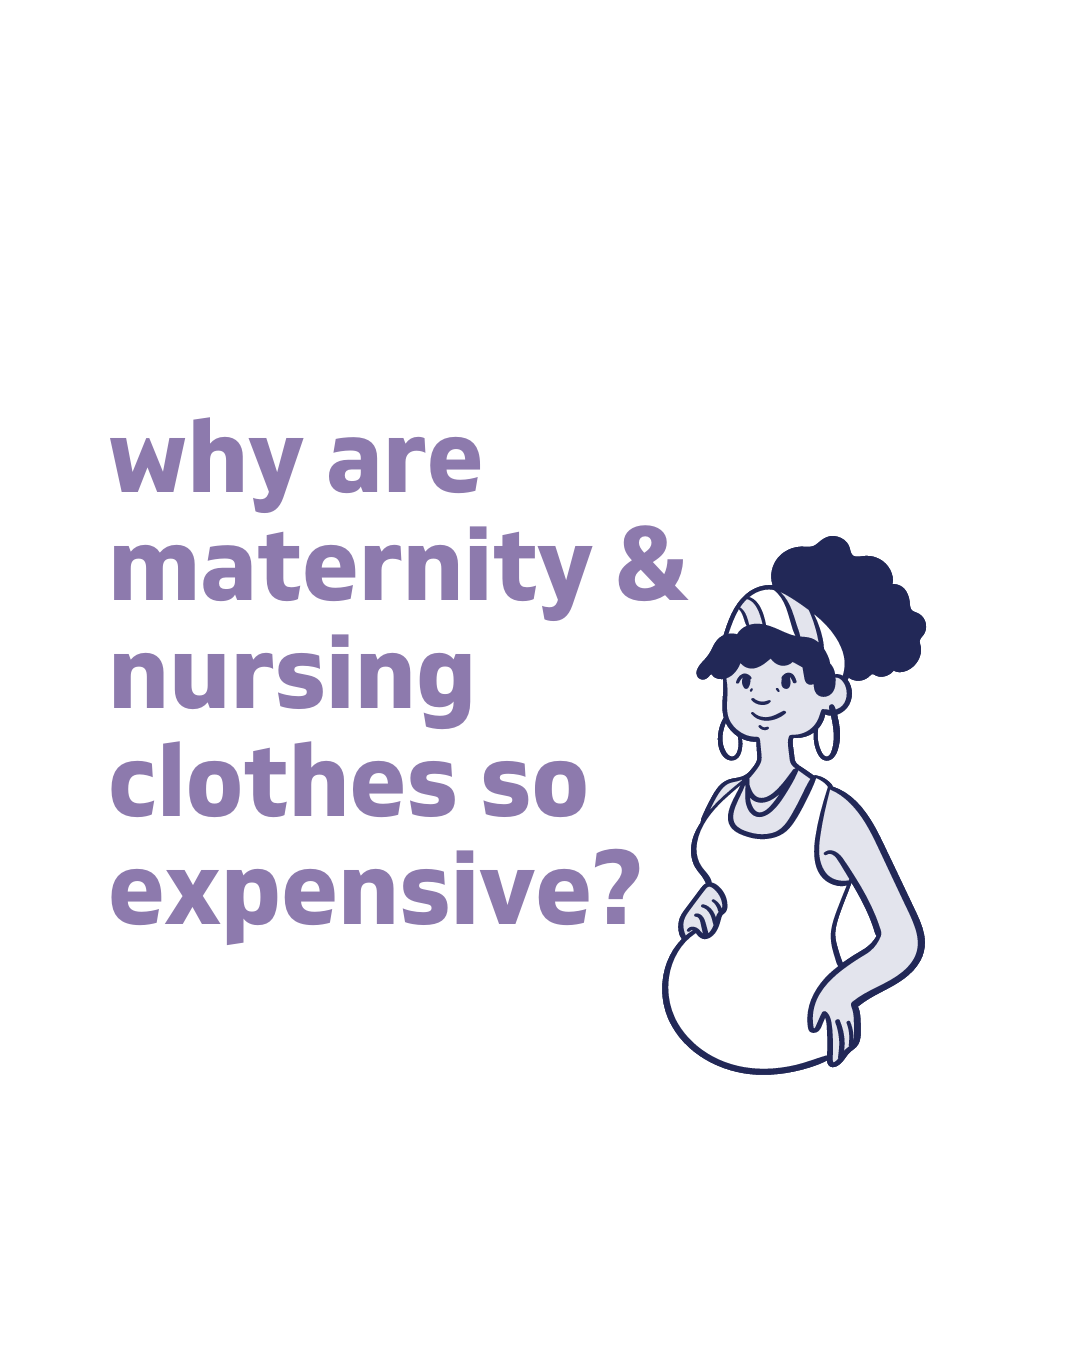 Why is maternity clothing so expensive?